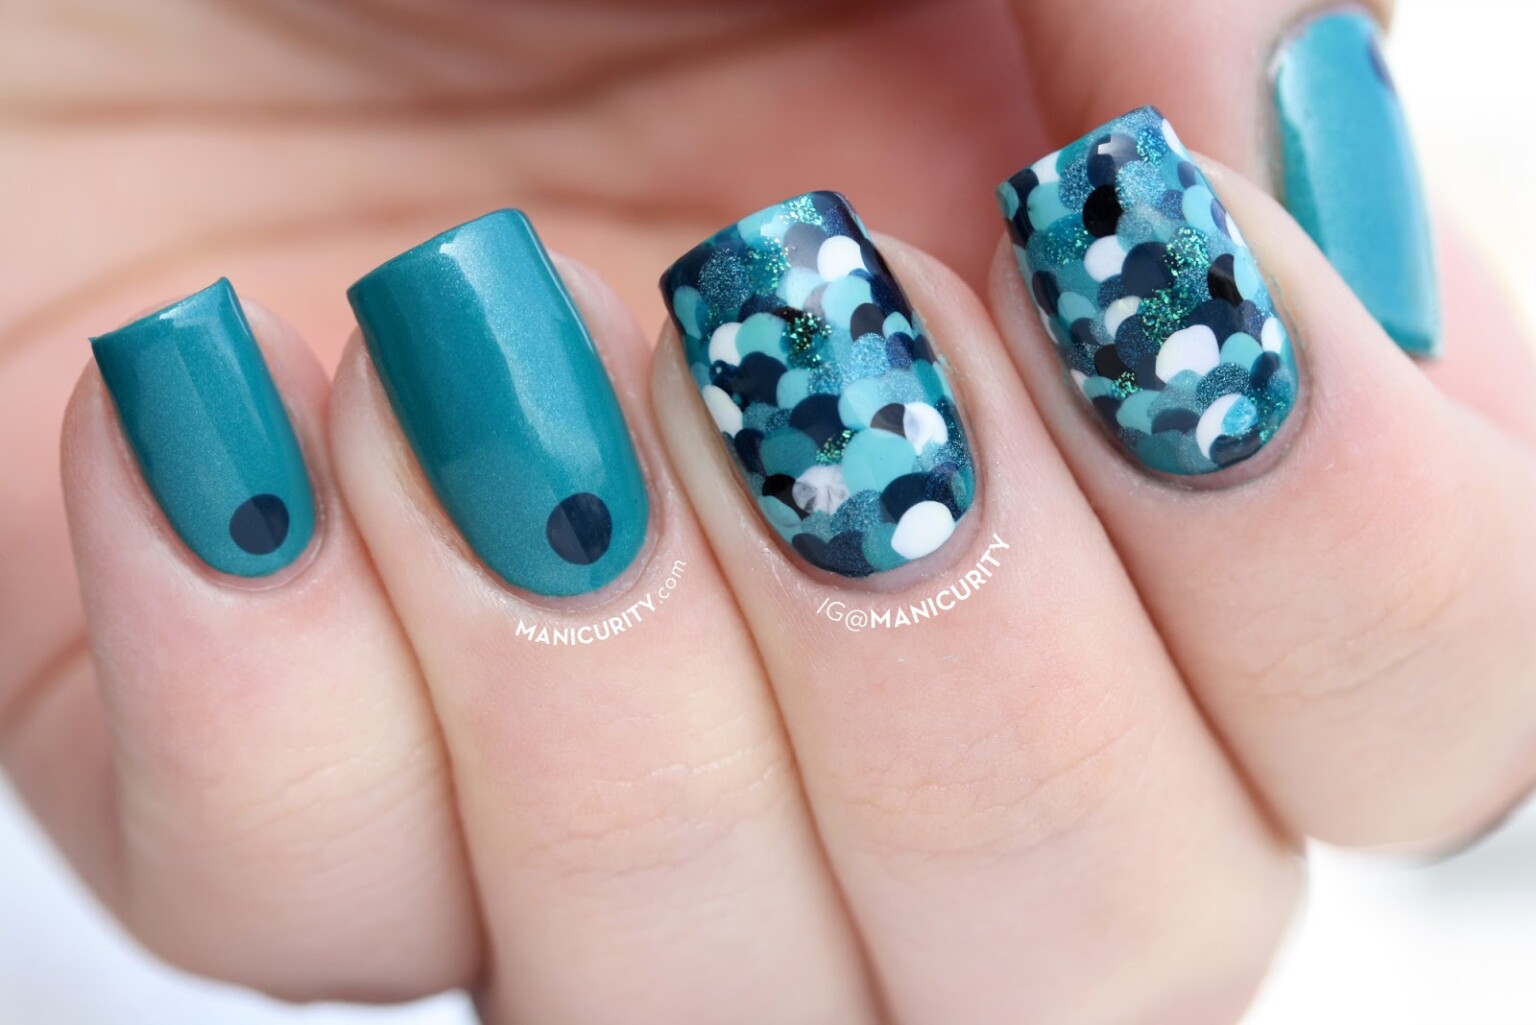 3. Creative Nail Art Inspiration for Your Next Manicure - wide 5